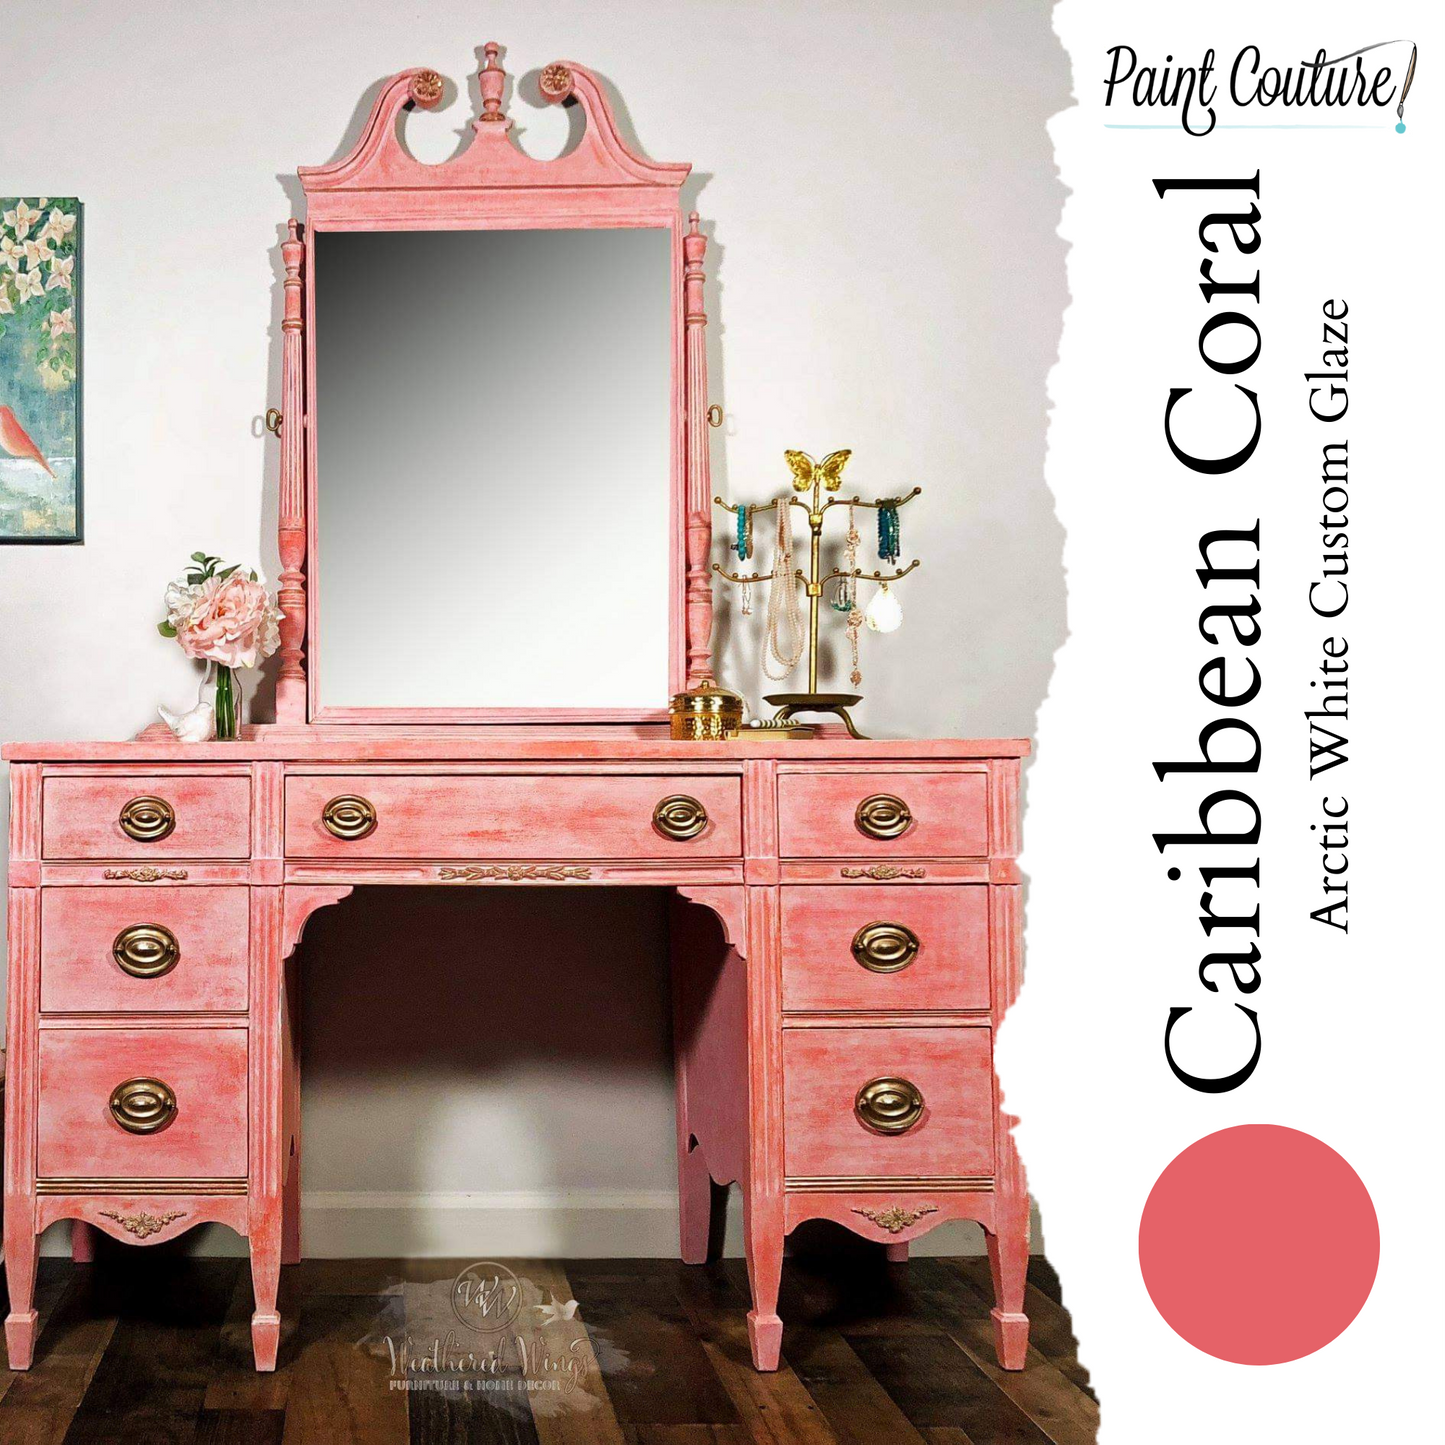 Paint Couture Caribbean Coral